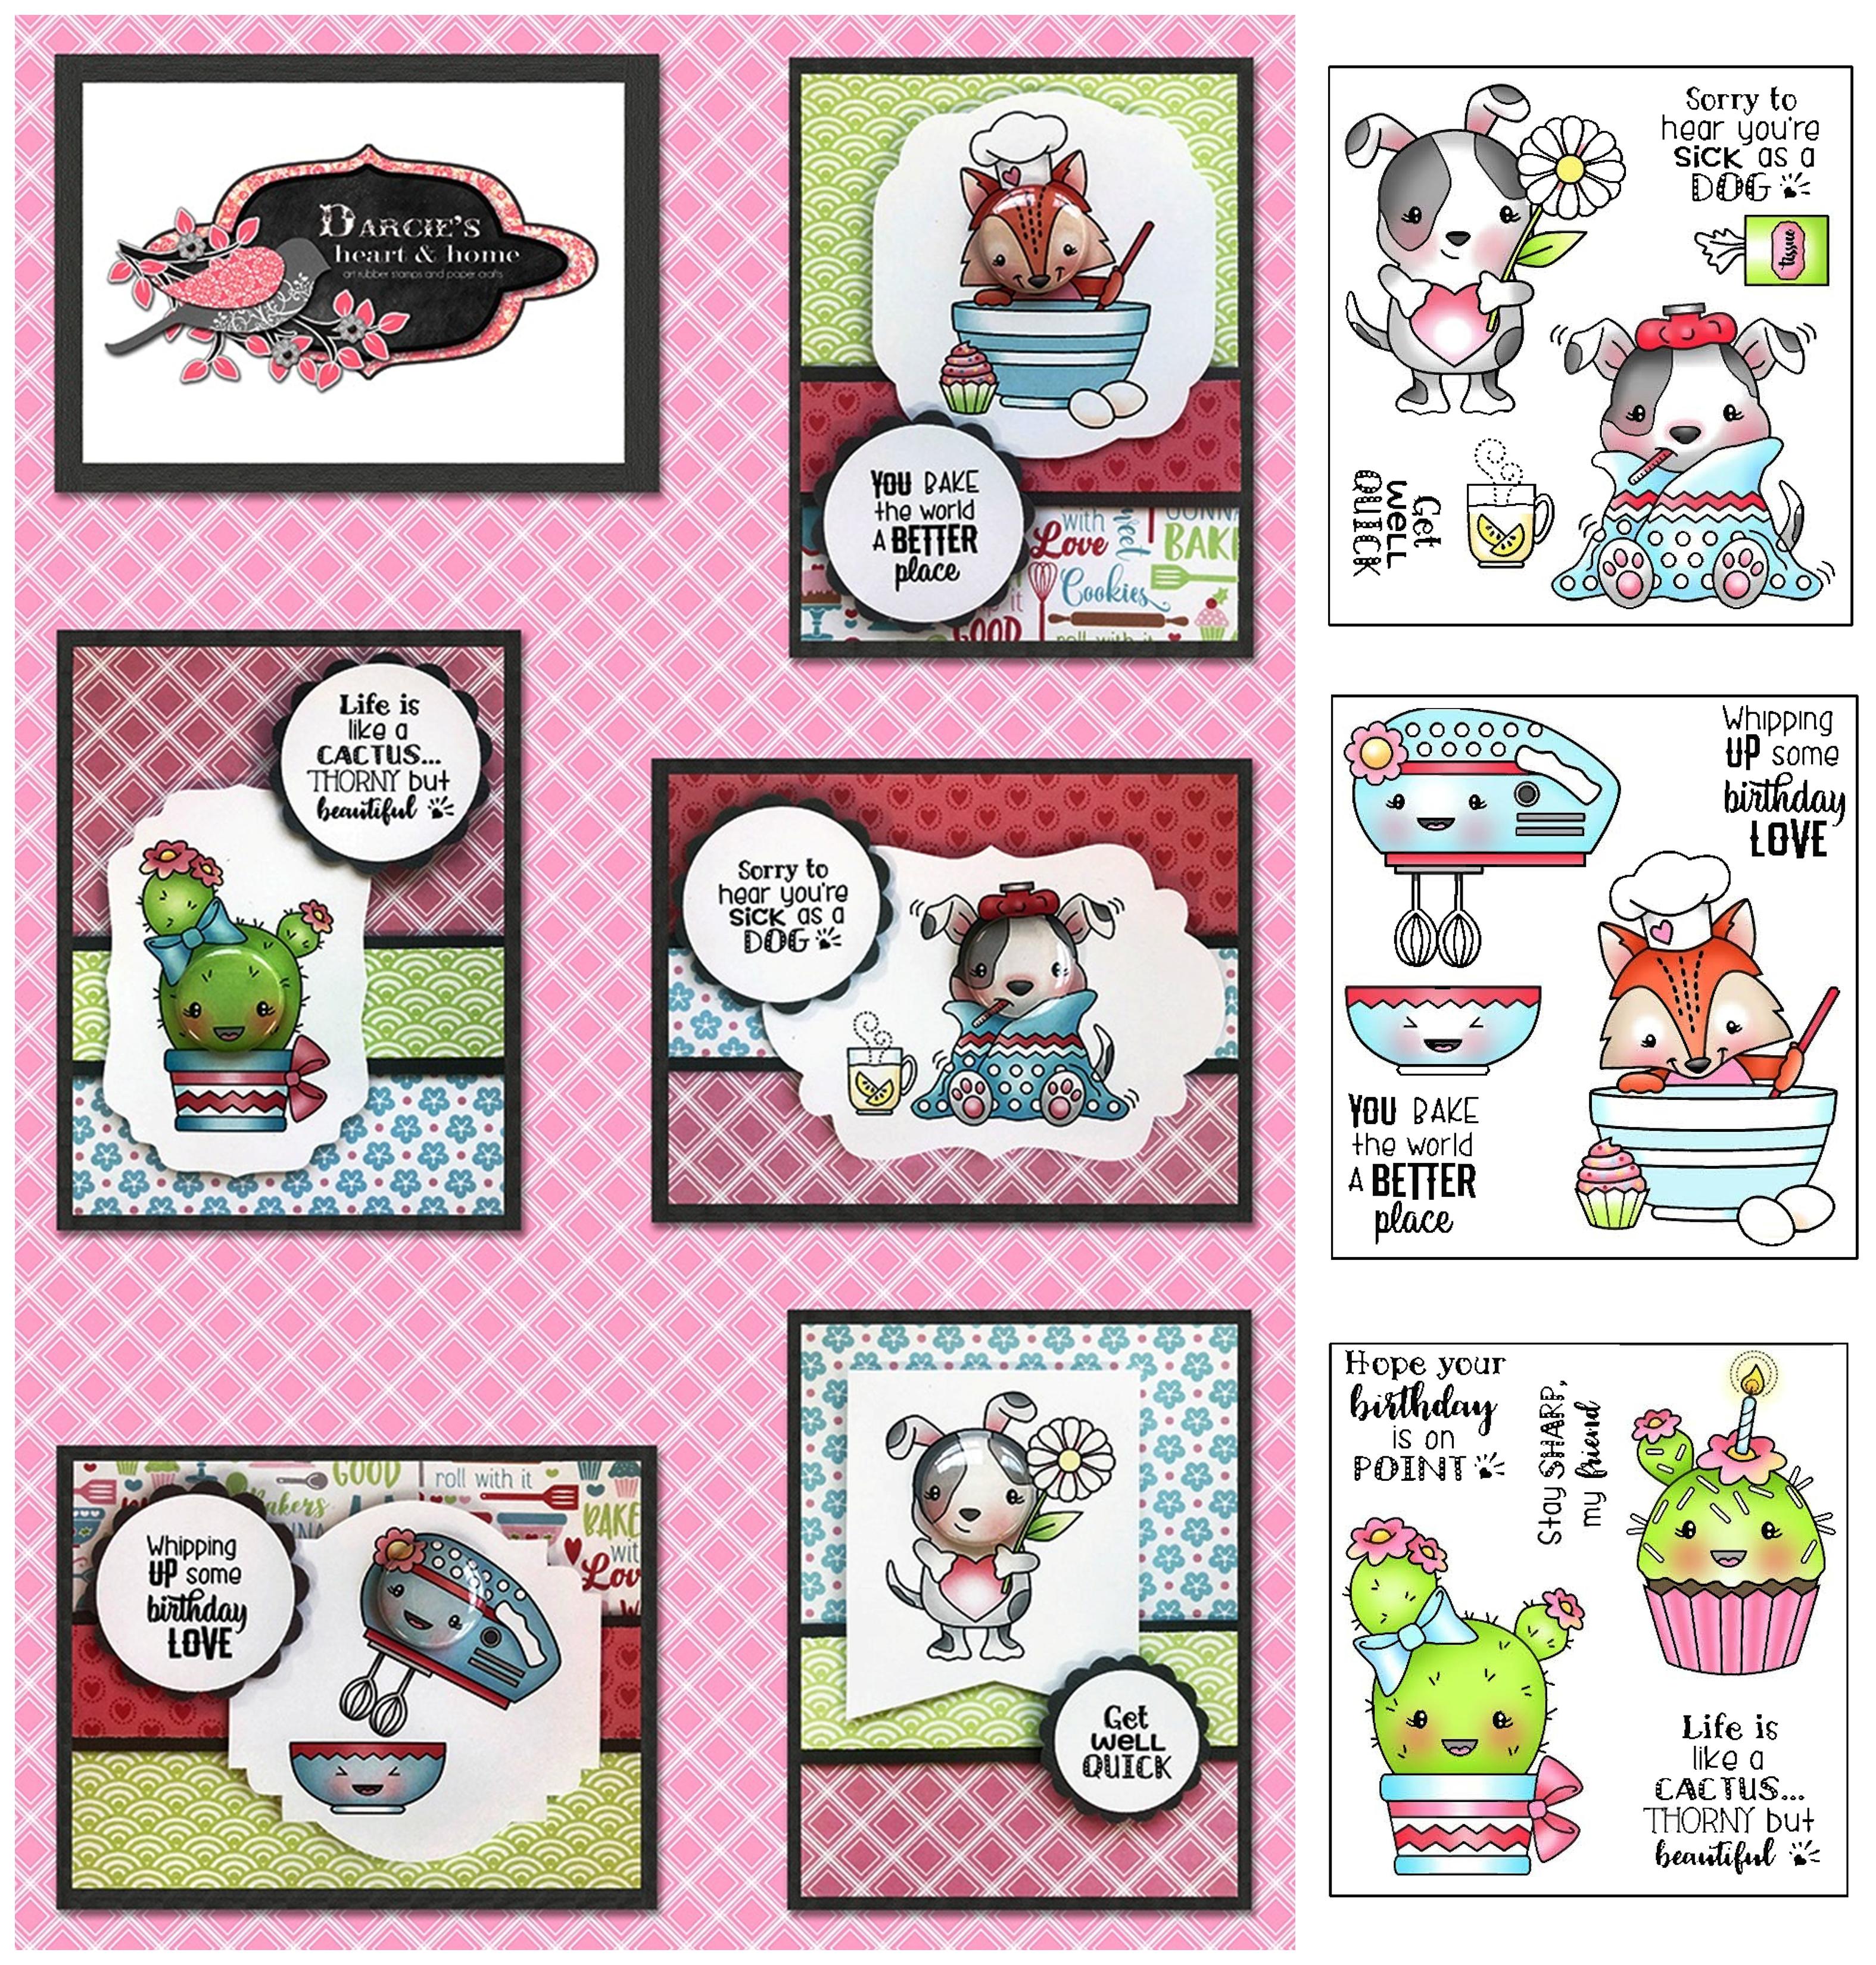 Darcies 2019-03 March w stamps